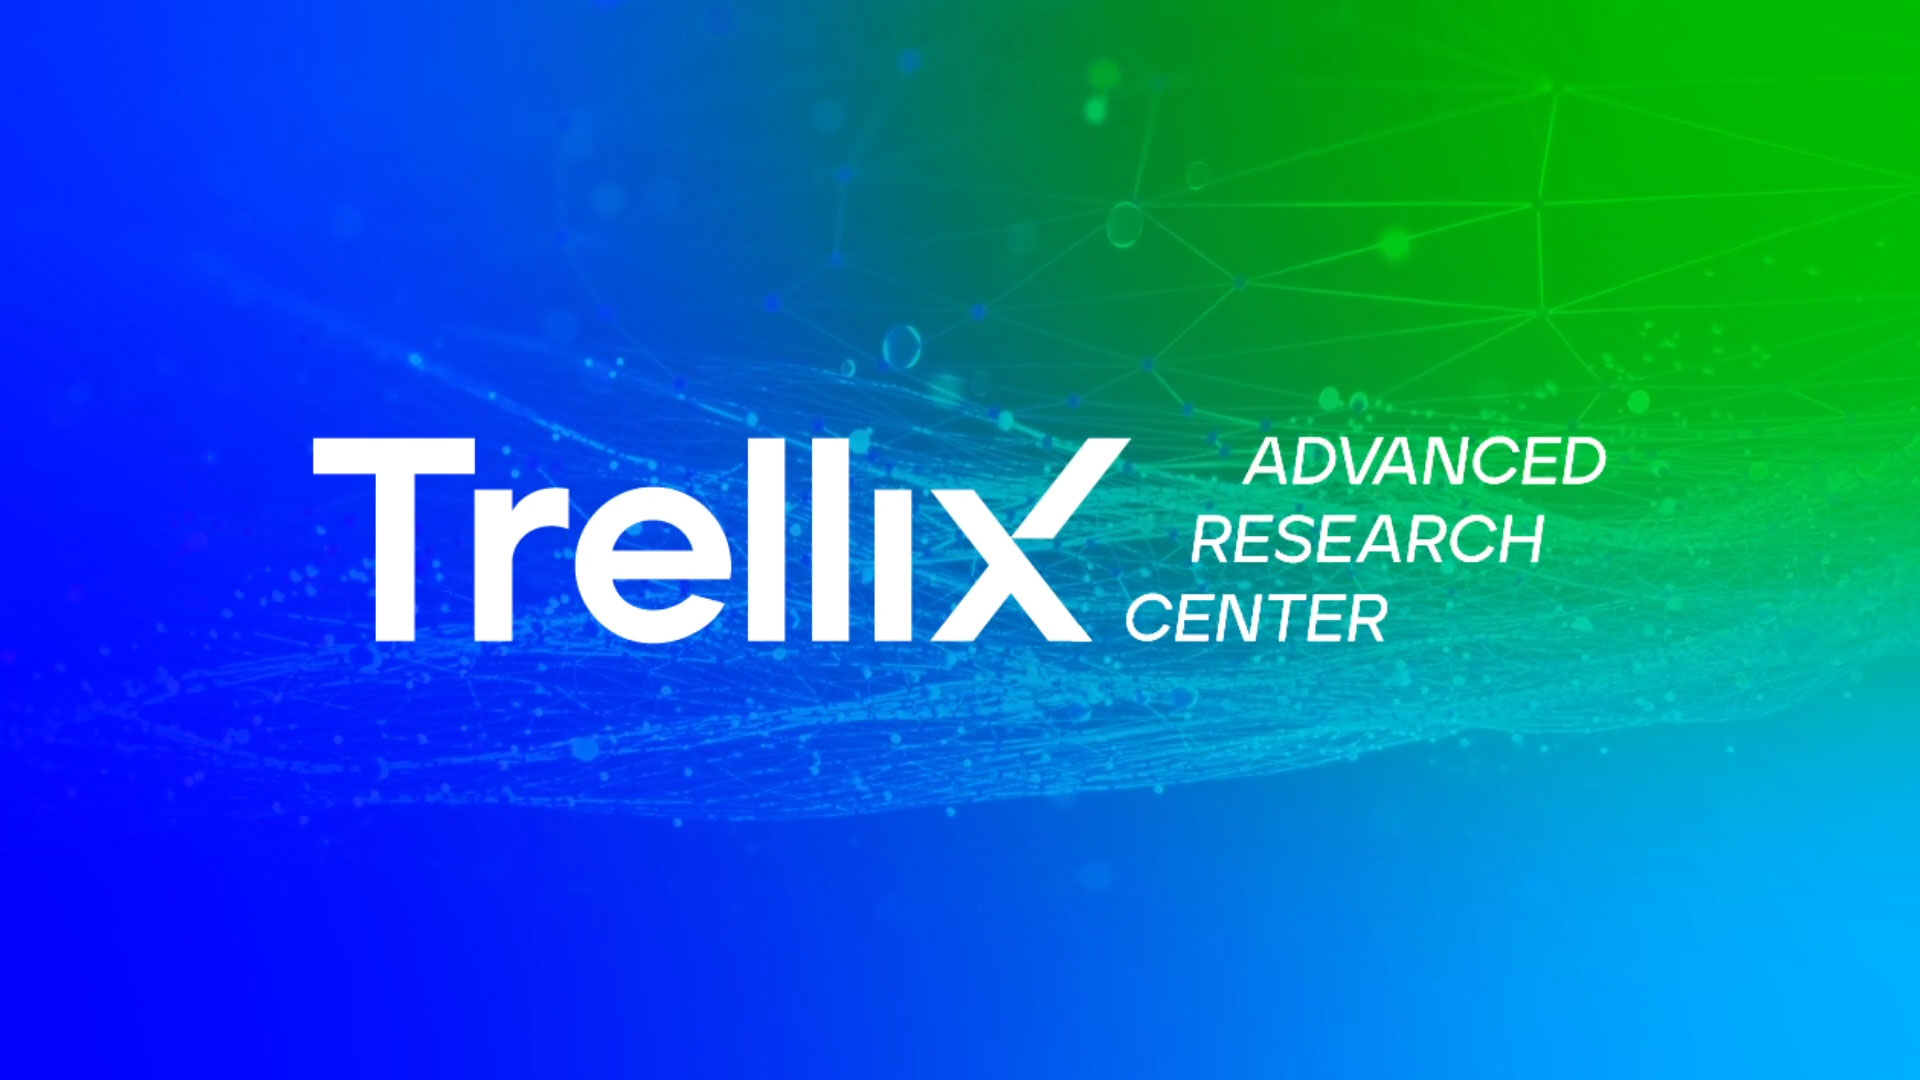 Trellix Launches Advanced Research Center to advance global threat intelligence.